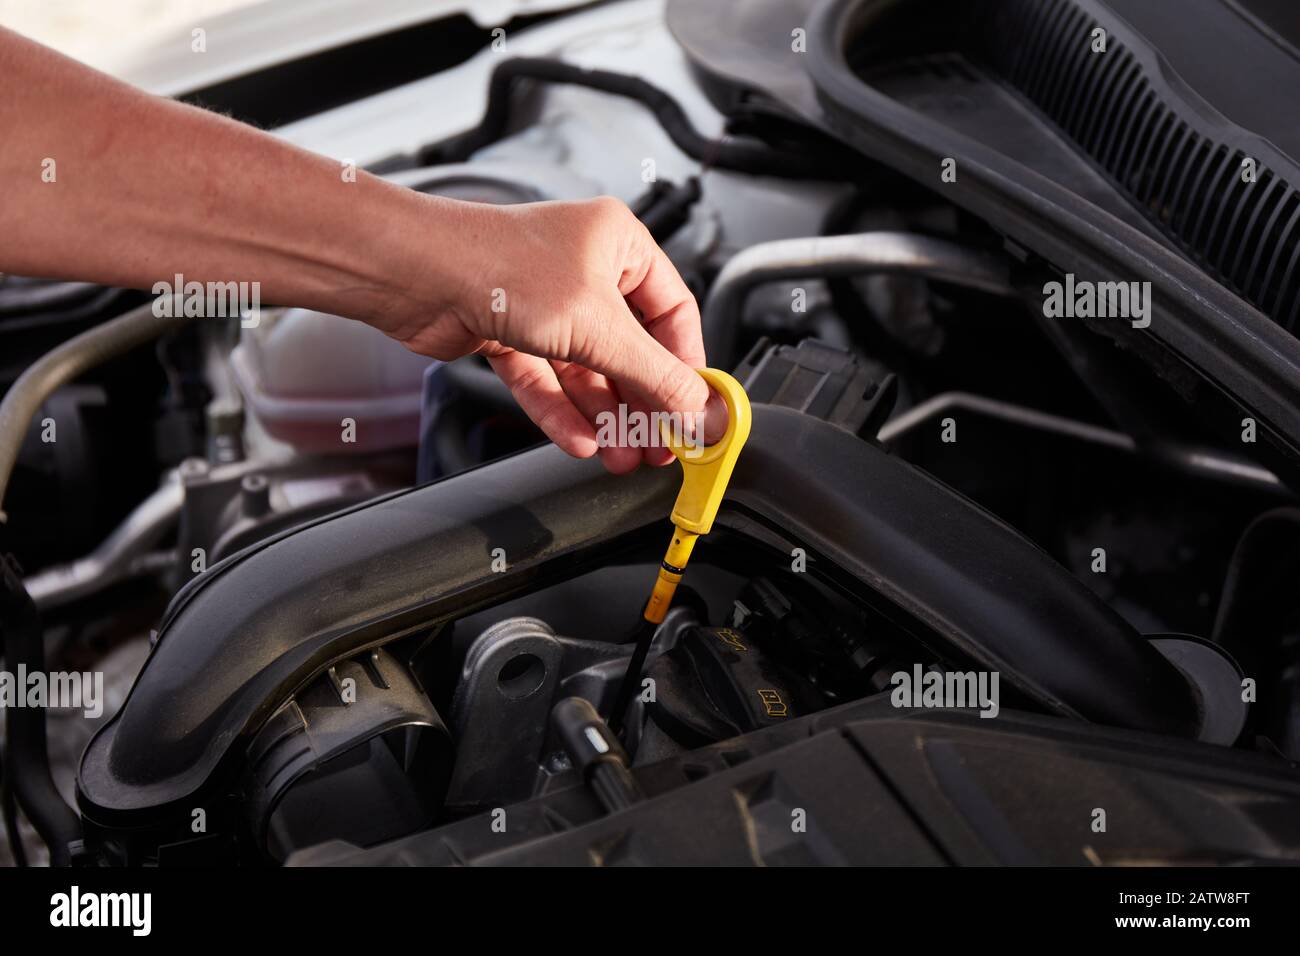 Checking engine oil. A woman's hand holding an oil bayonet in a modern popular car. Stock Photo